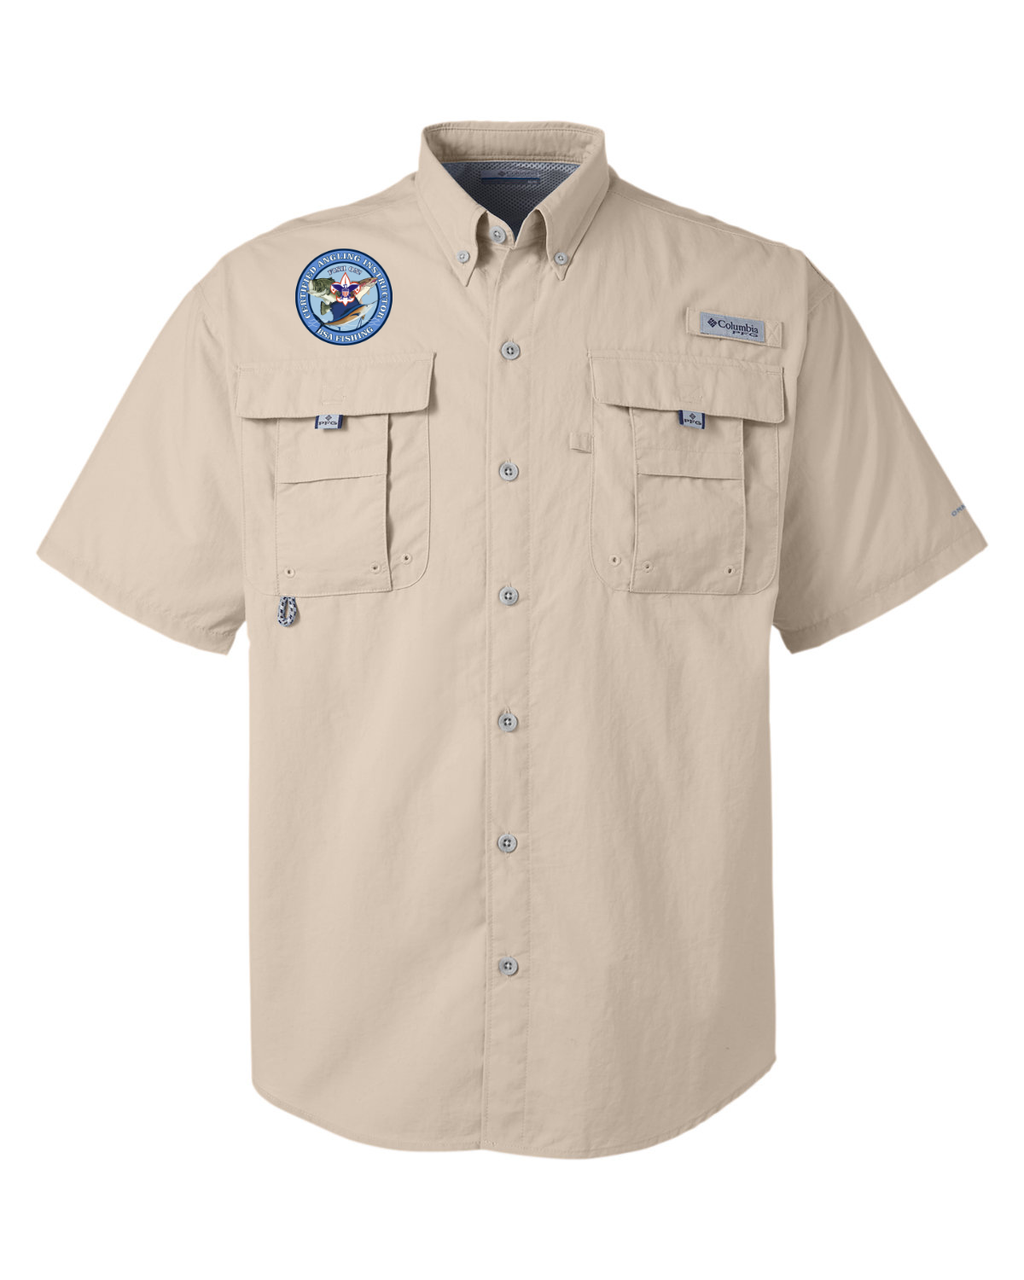 Short Sleeve Fishing Shirt with BSA Corporate Logo Short Sleeve Fis by ClassB